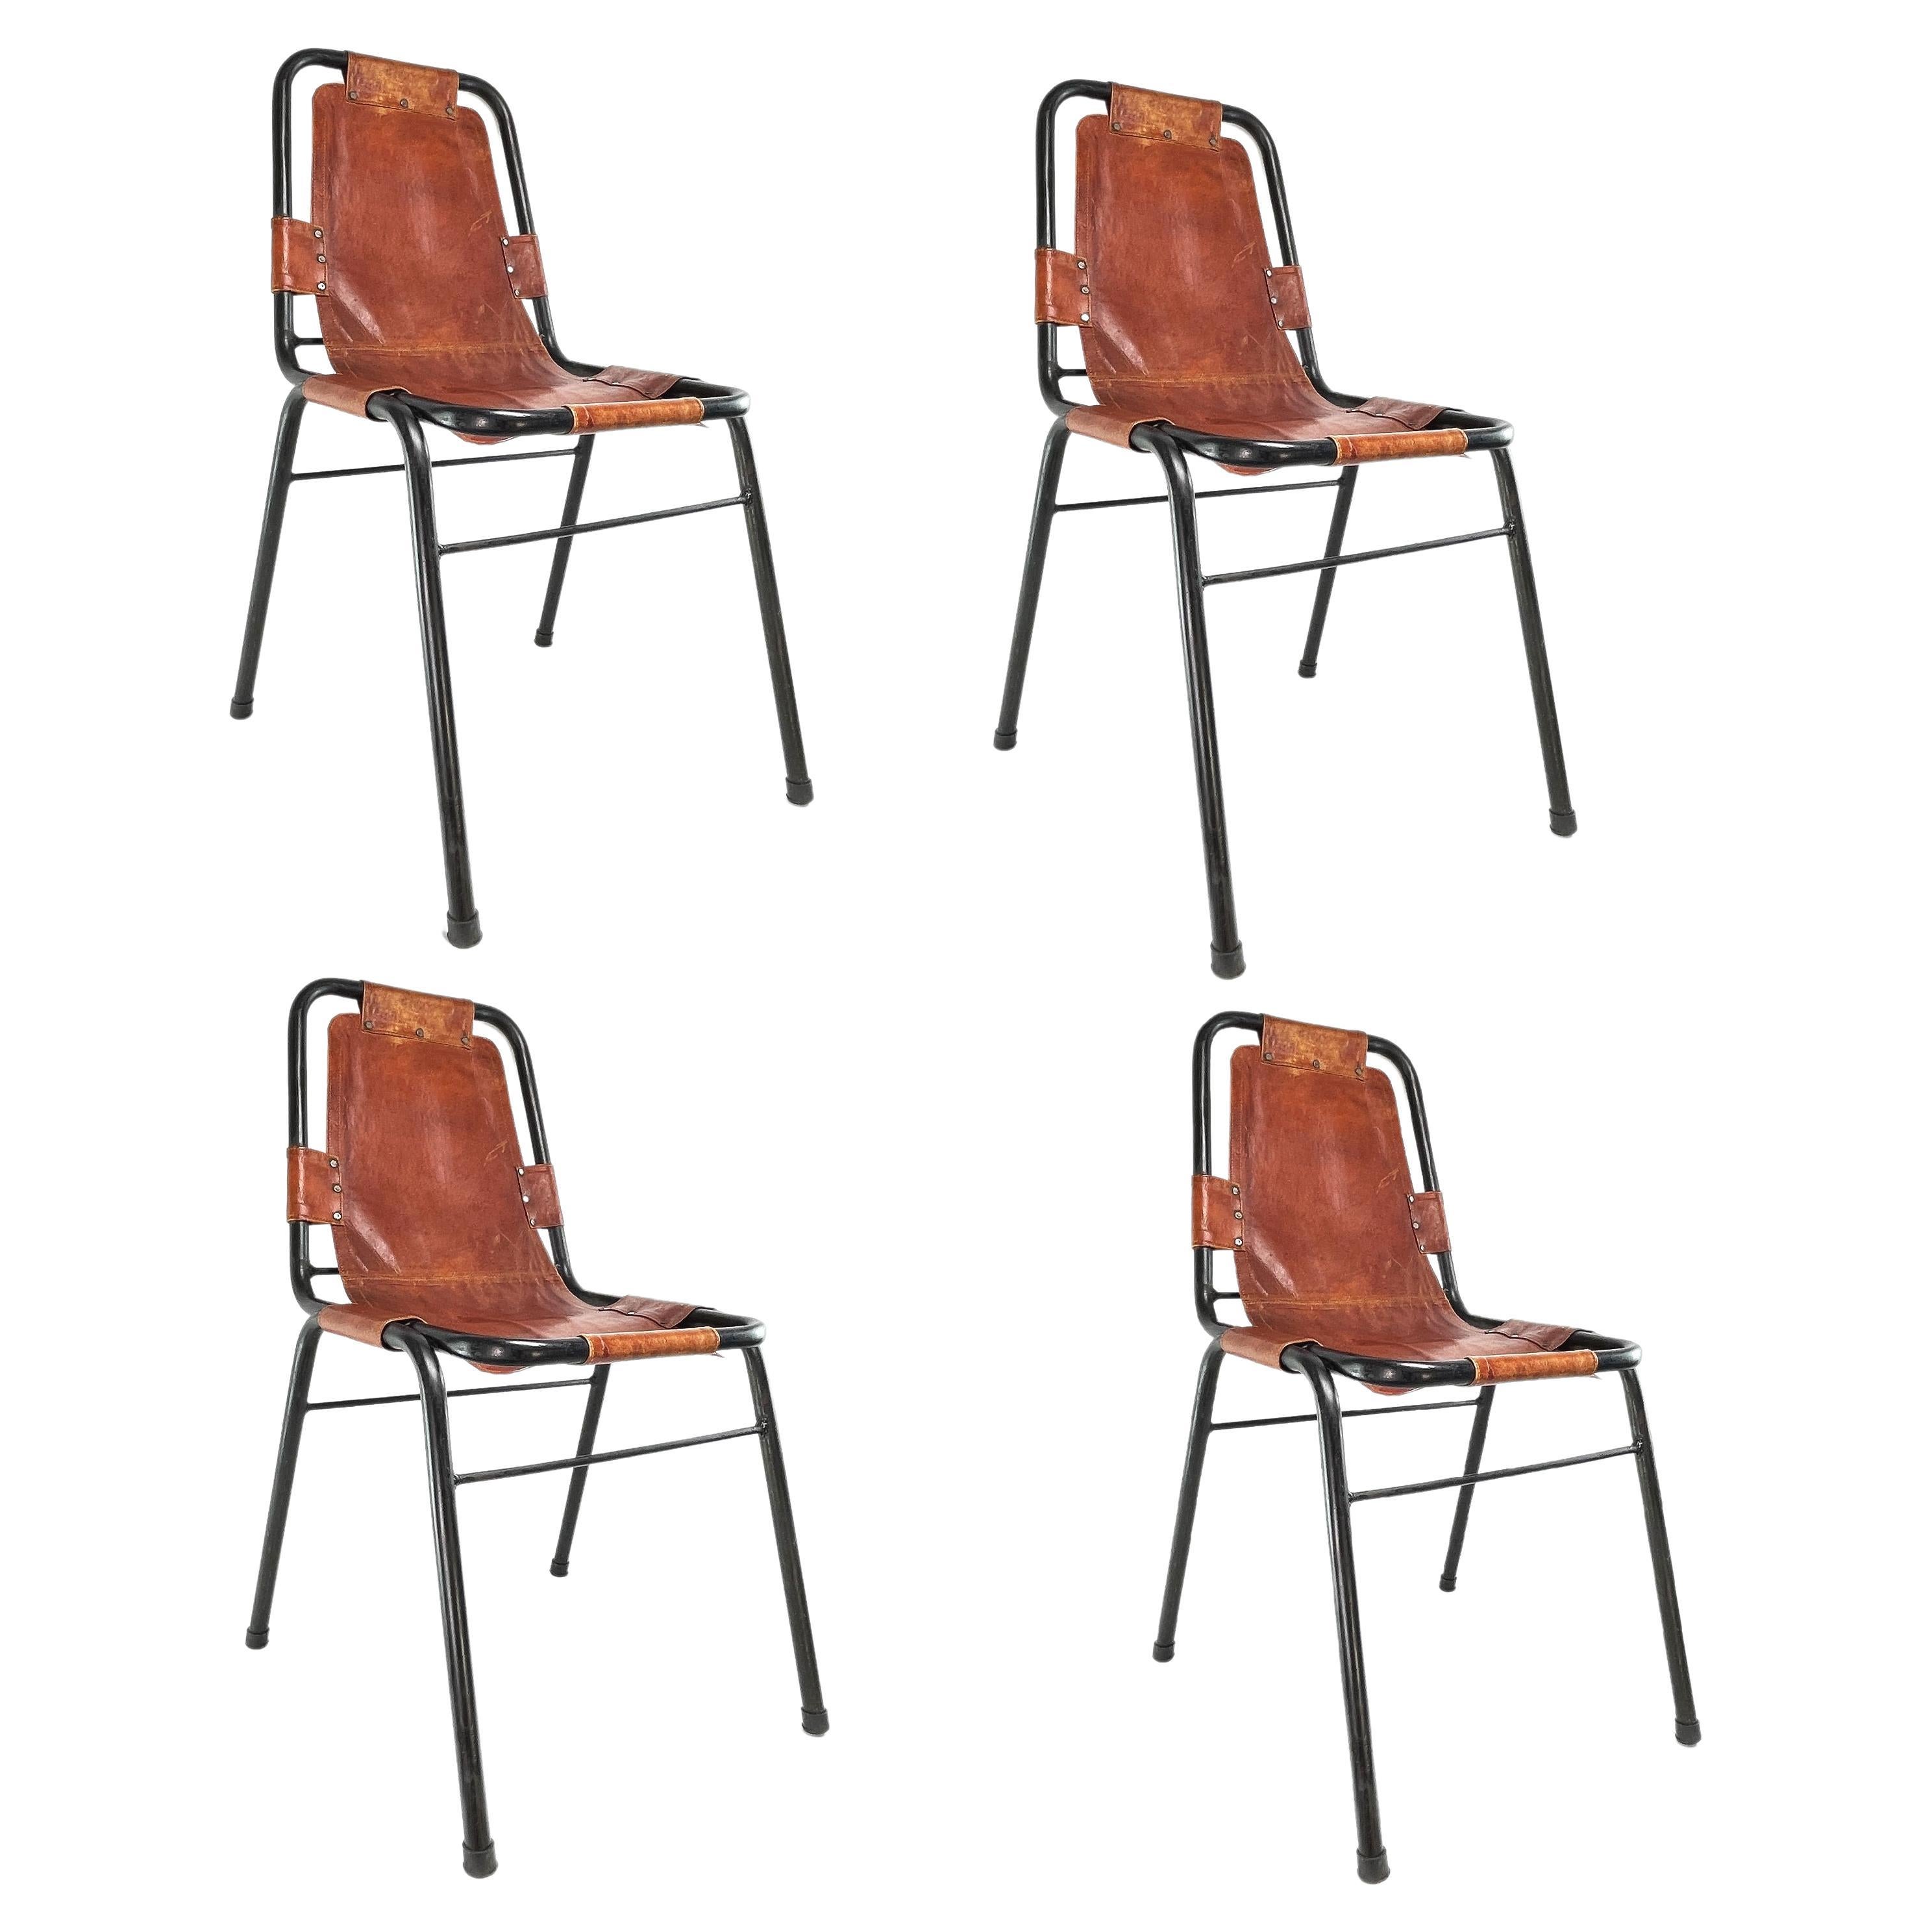 1960s Dal Vera Stacking Chairs for Charlotte Perriand Les Arcs Resort Set  of 6